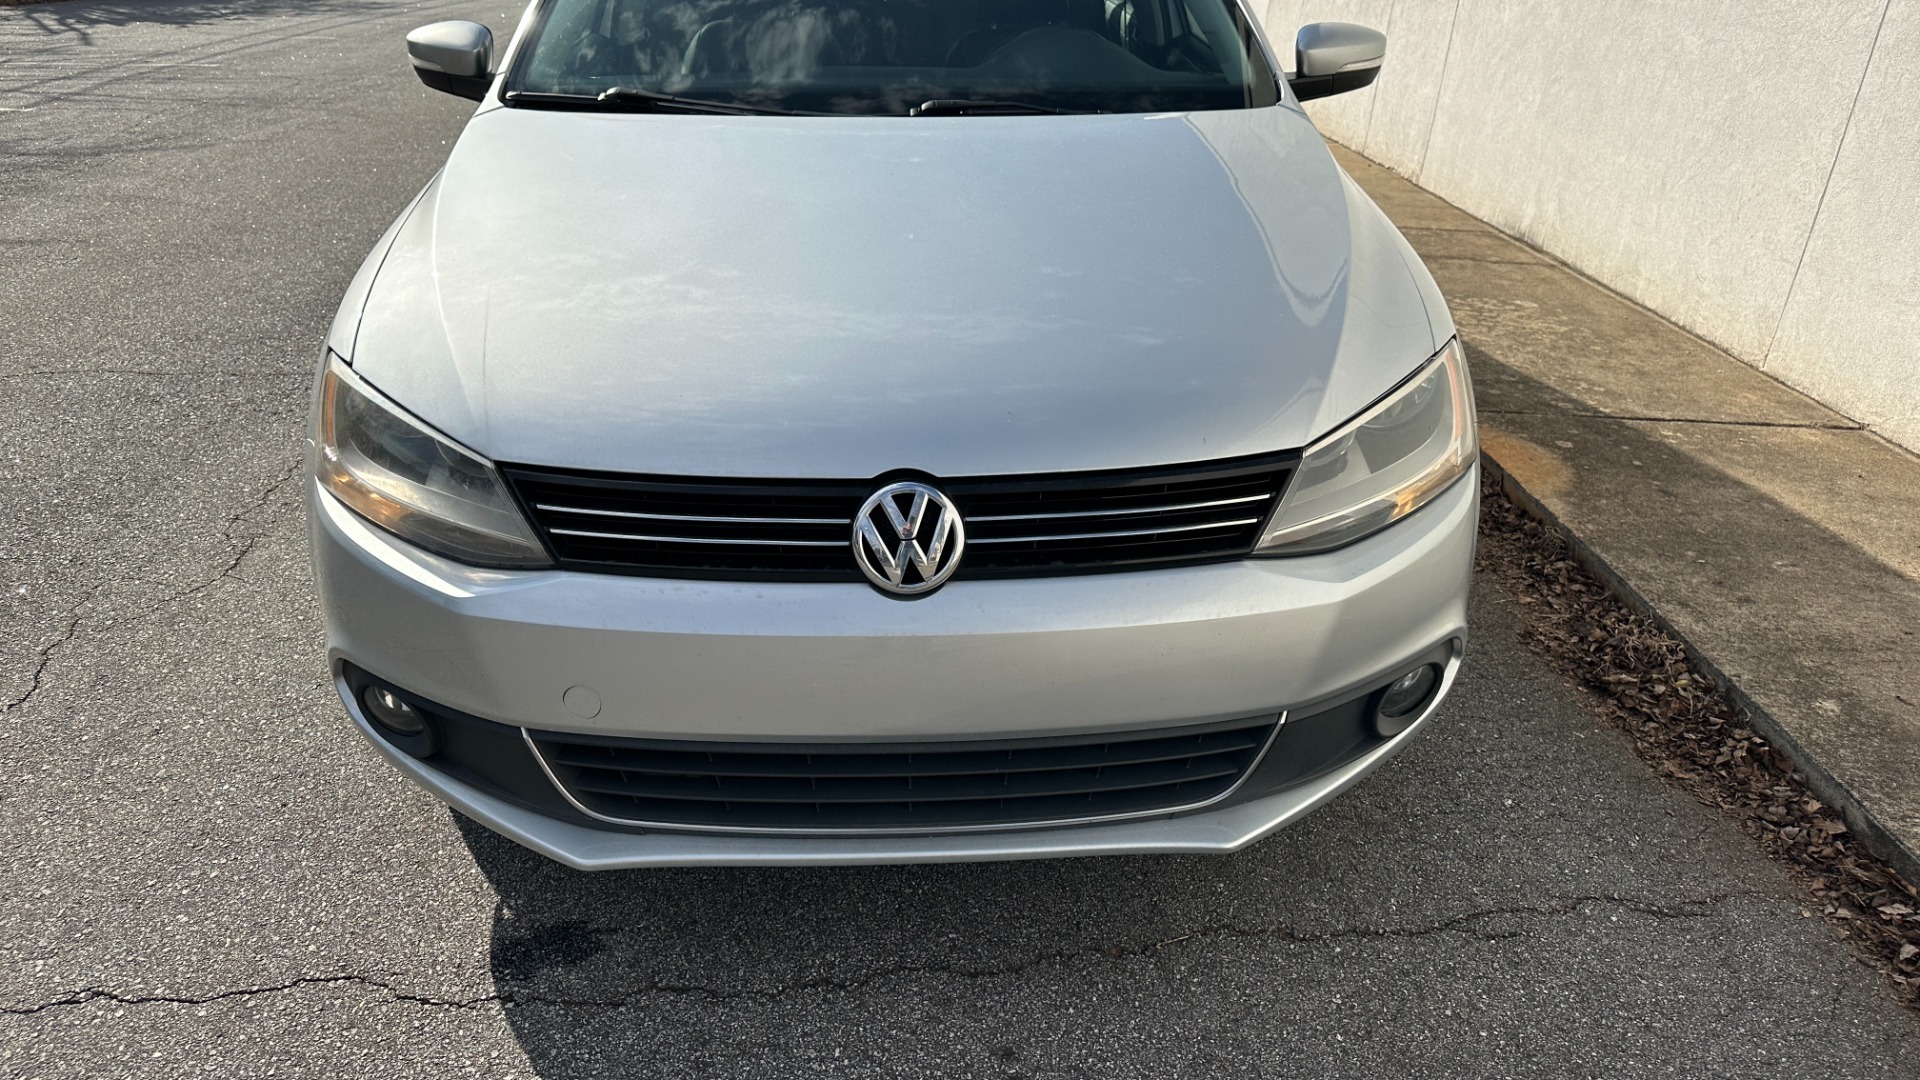 Used 2011 Volkswagen Jetta Sedan SEL / LEATHER / SUNROOF / BLUETOOTH for sale $7,995 at Formula Imports in Charlotte NC 28227 7